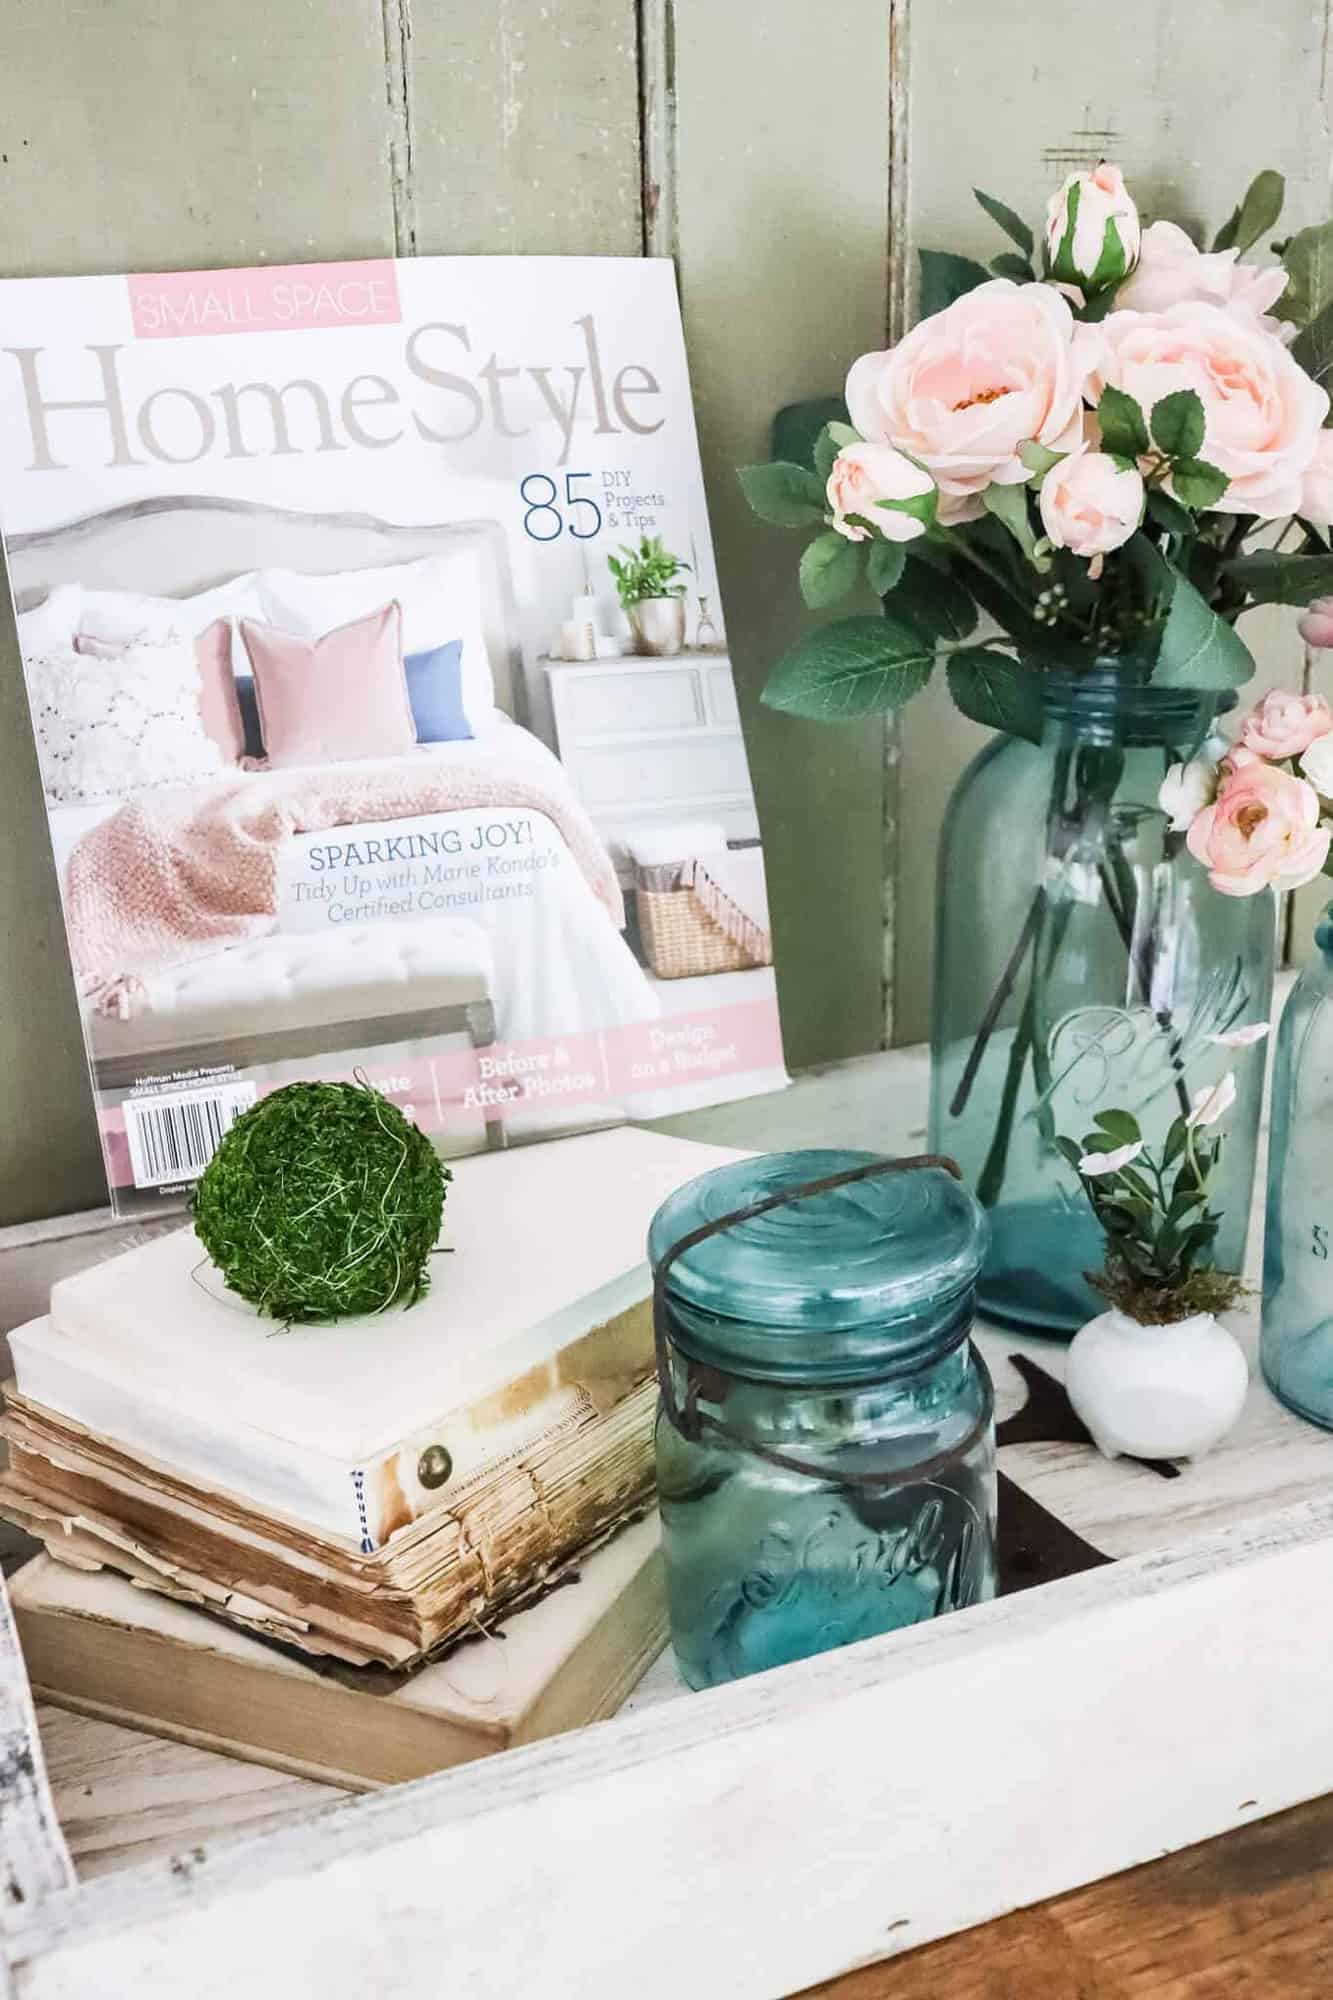 Small Space Home Style Magazine Feature